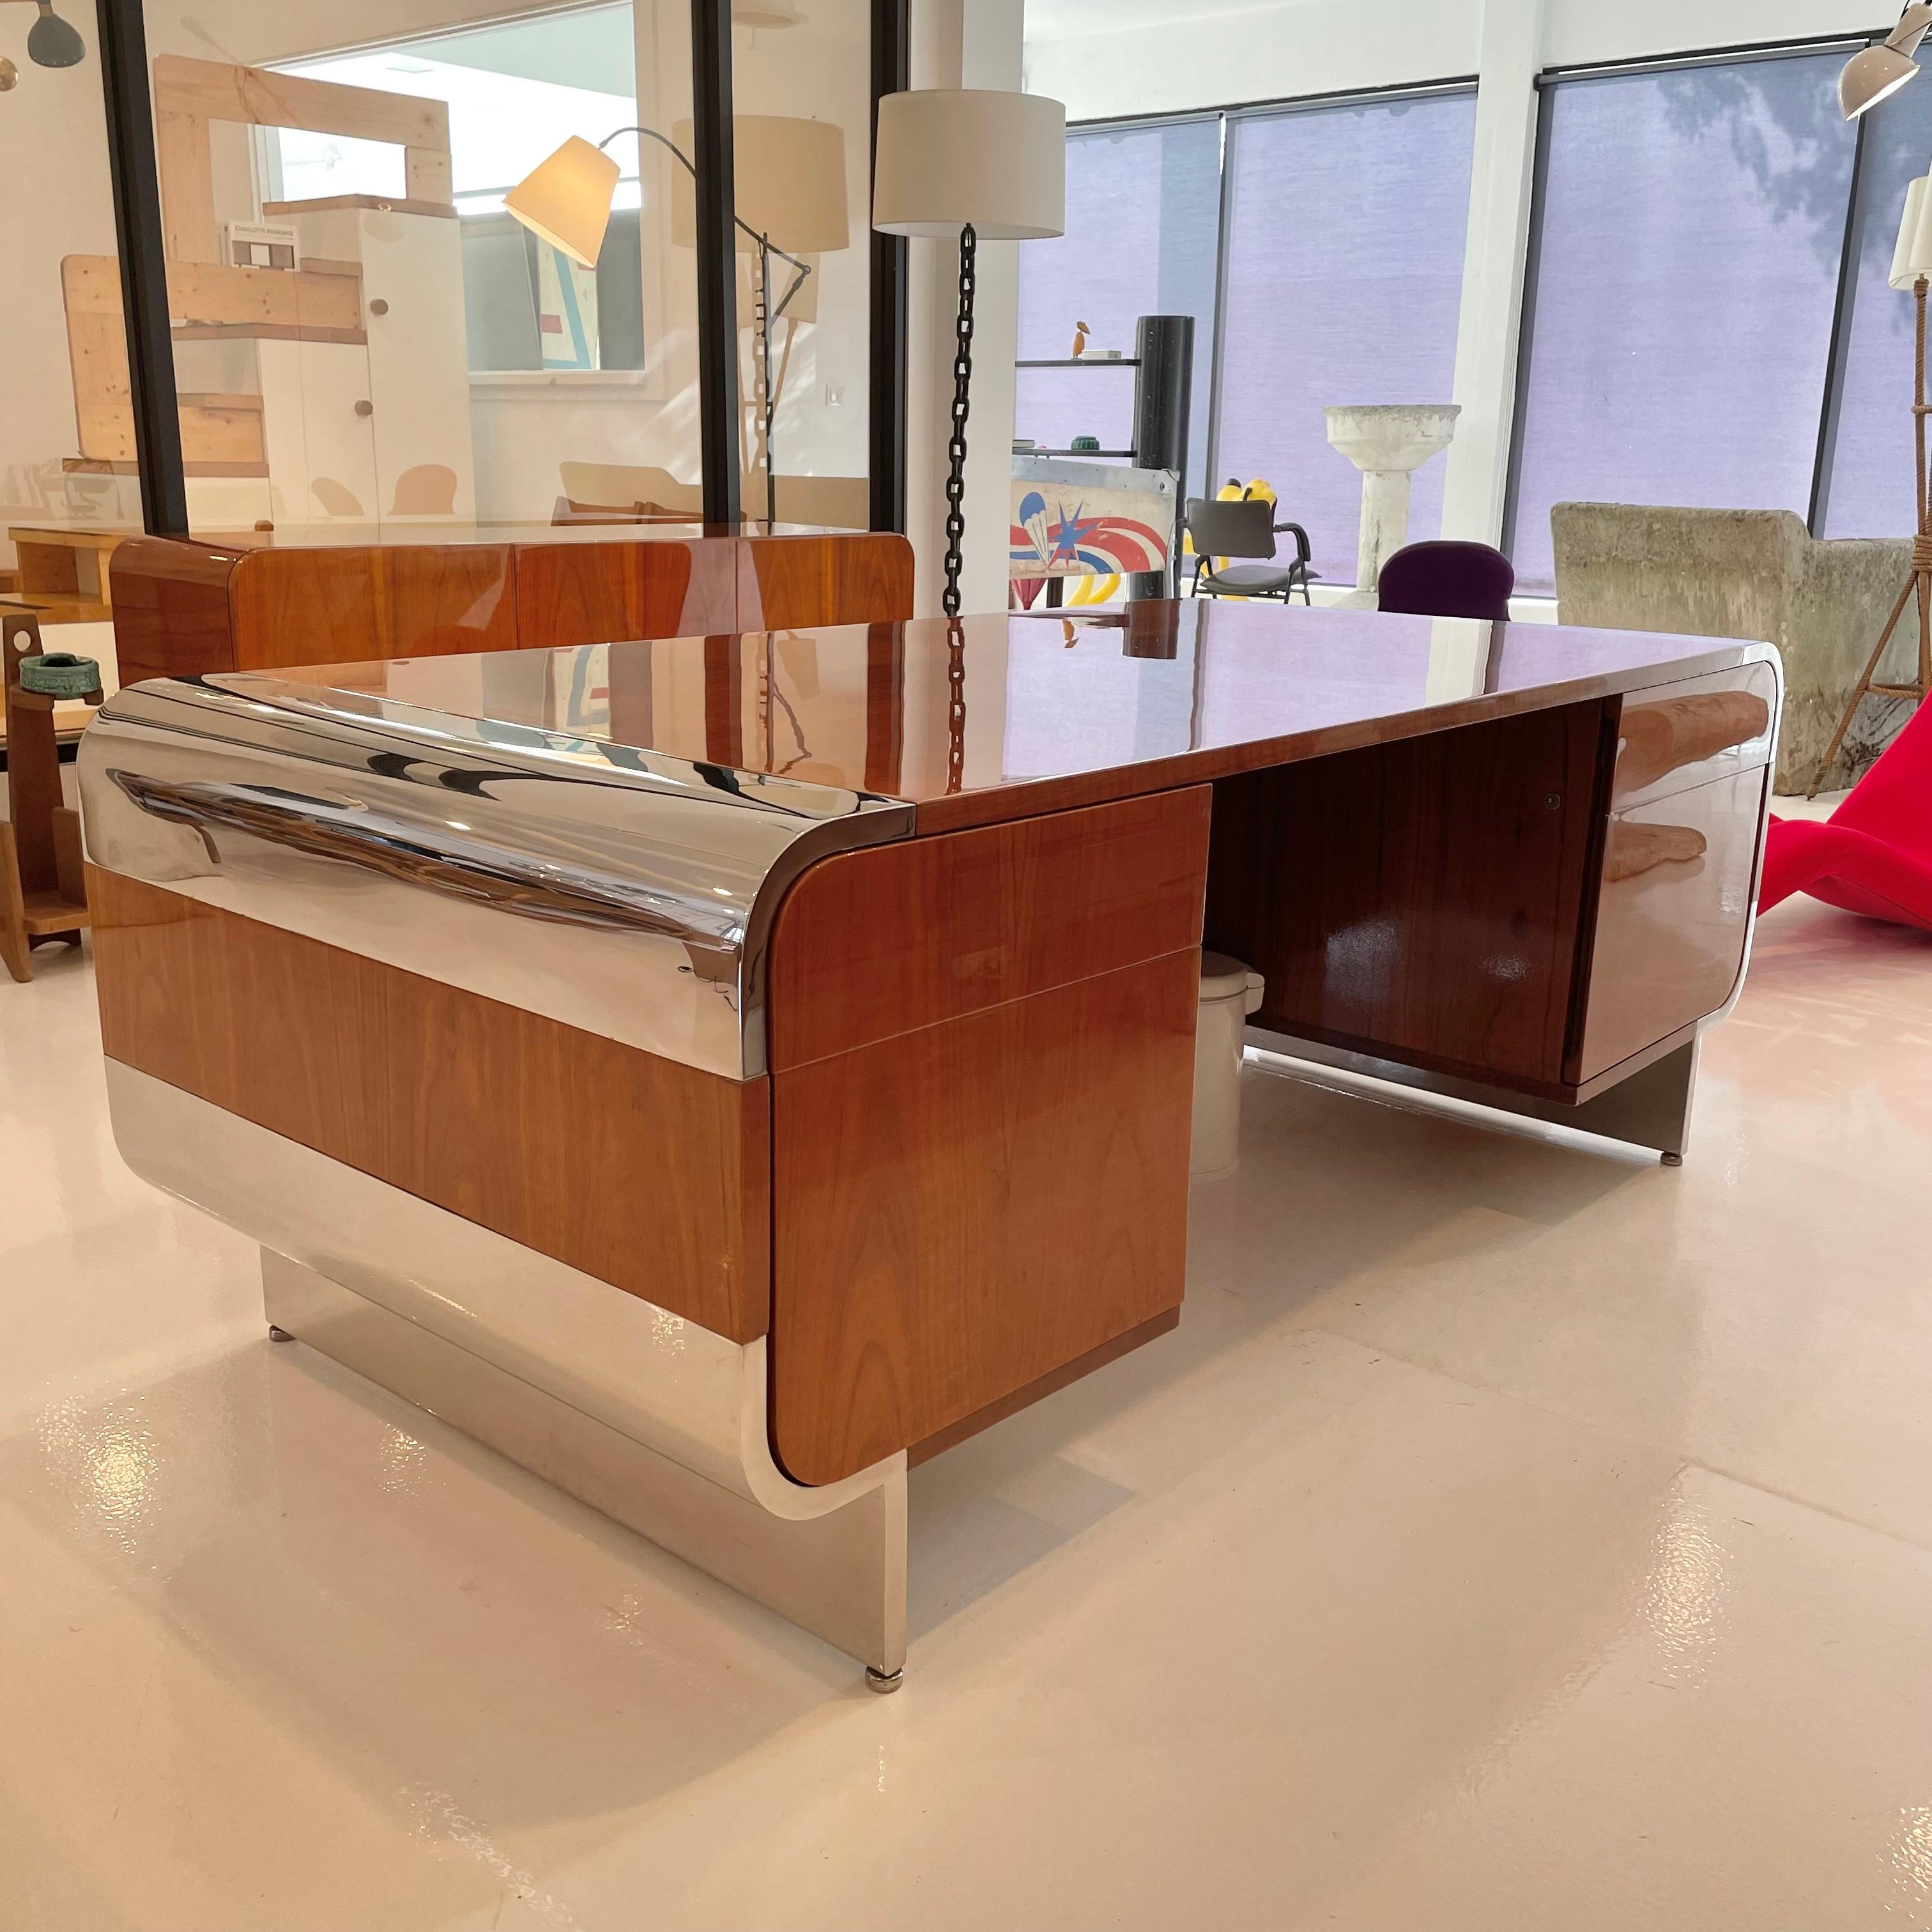 Recently restored and refinished exquisite Pau Ferro hardwood desk by Irving Rosen for the Pace Collection circa 1974 with rounded waterfall corners in polished chrome atop polished chrome legs.

Beautiful grain patterning in the Pau Ferro with a